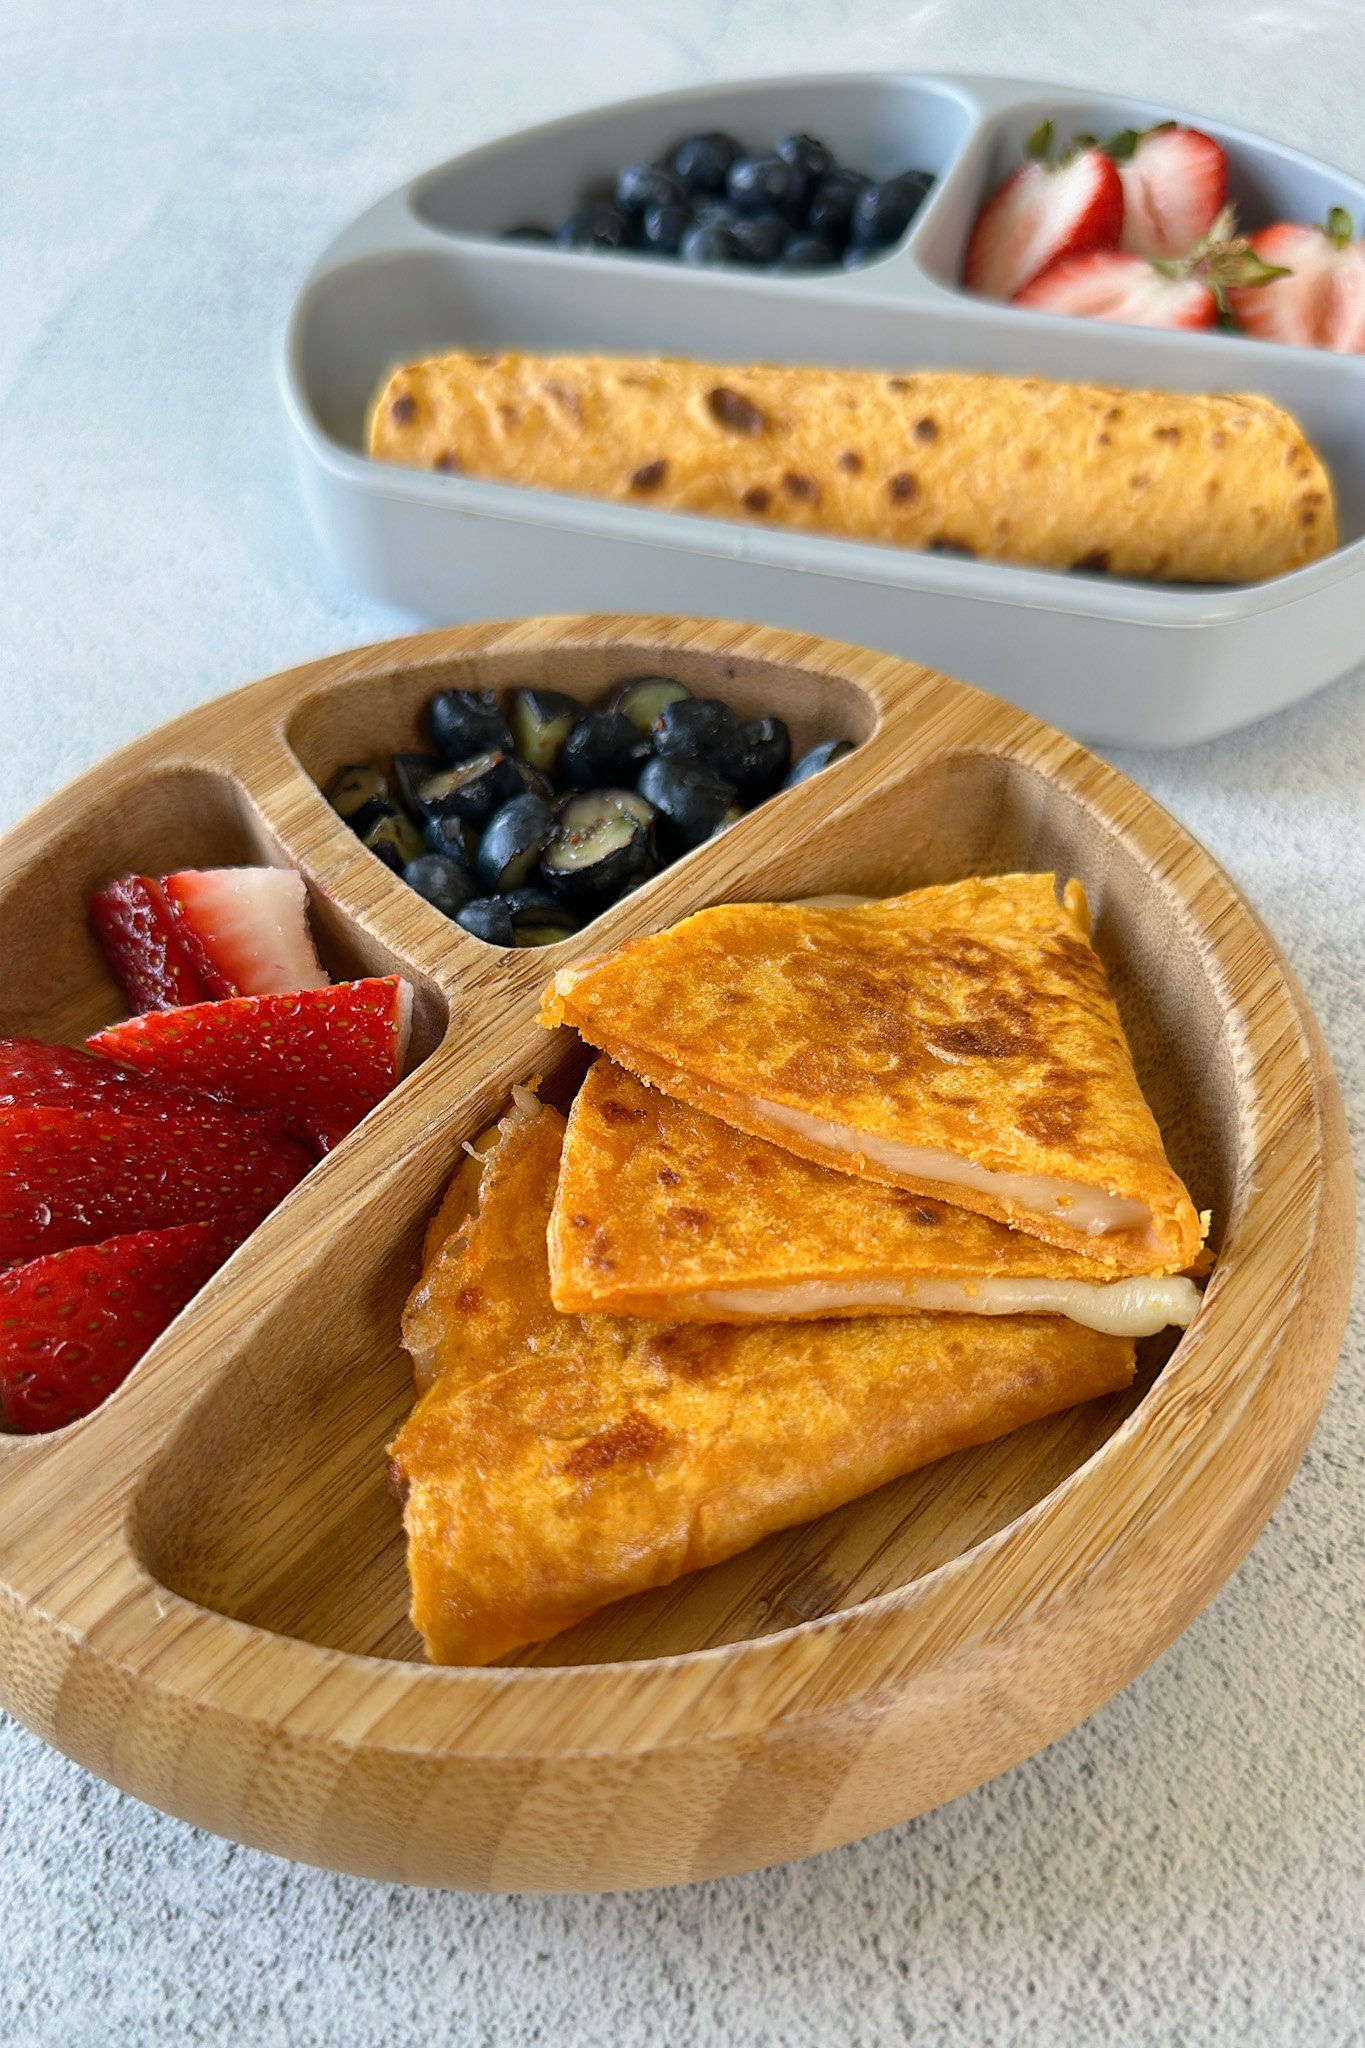 Sweet potato tortillas served with berries.